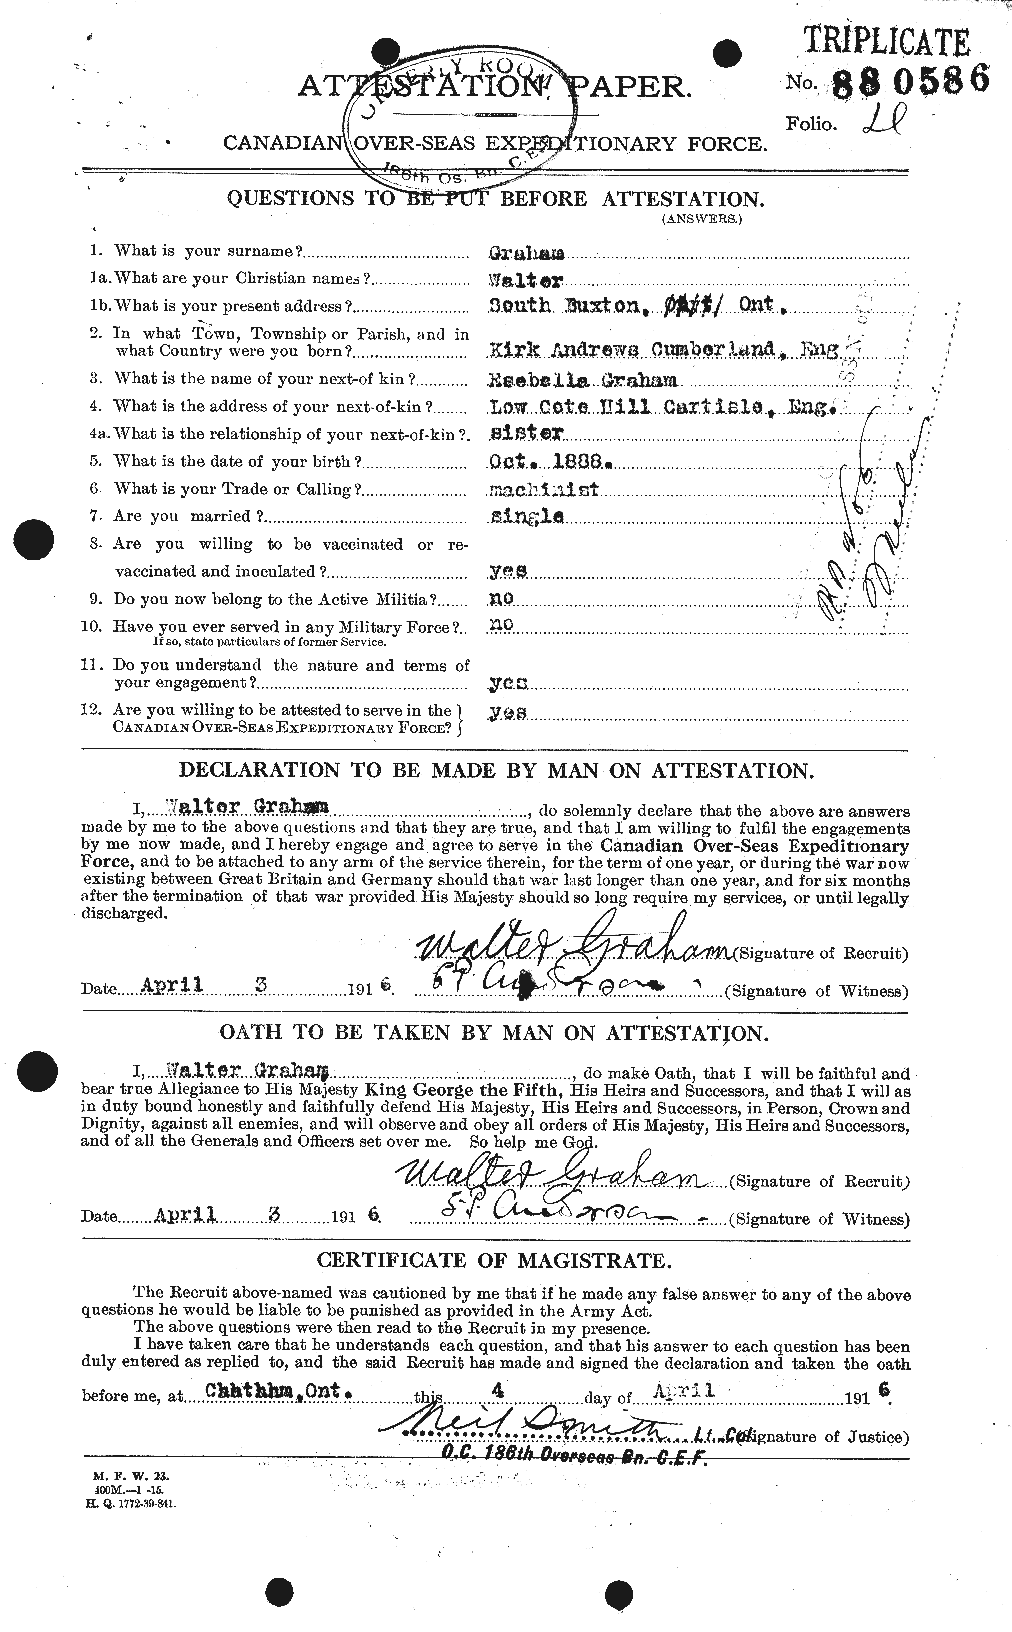 Personnel Records of the First World War - CEF 362651a